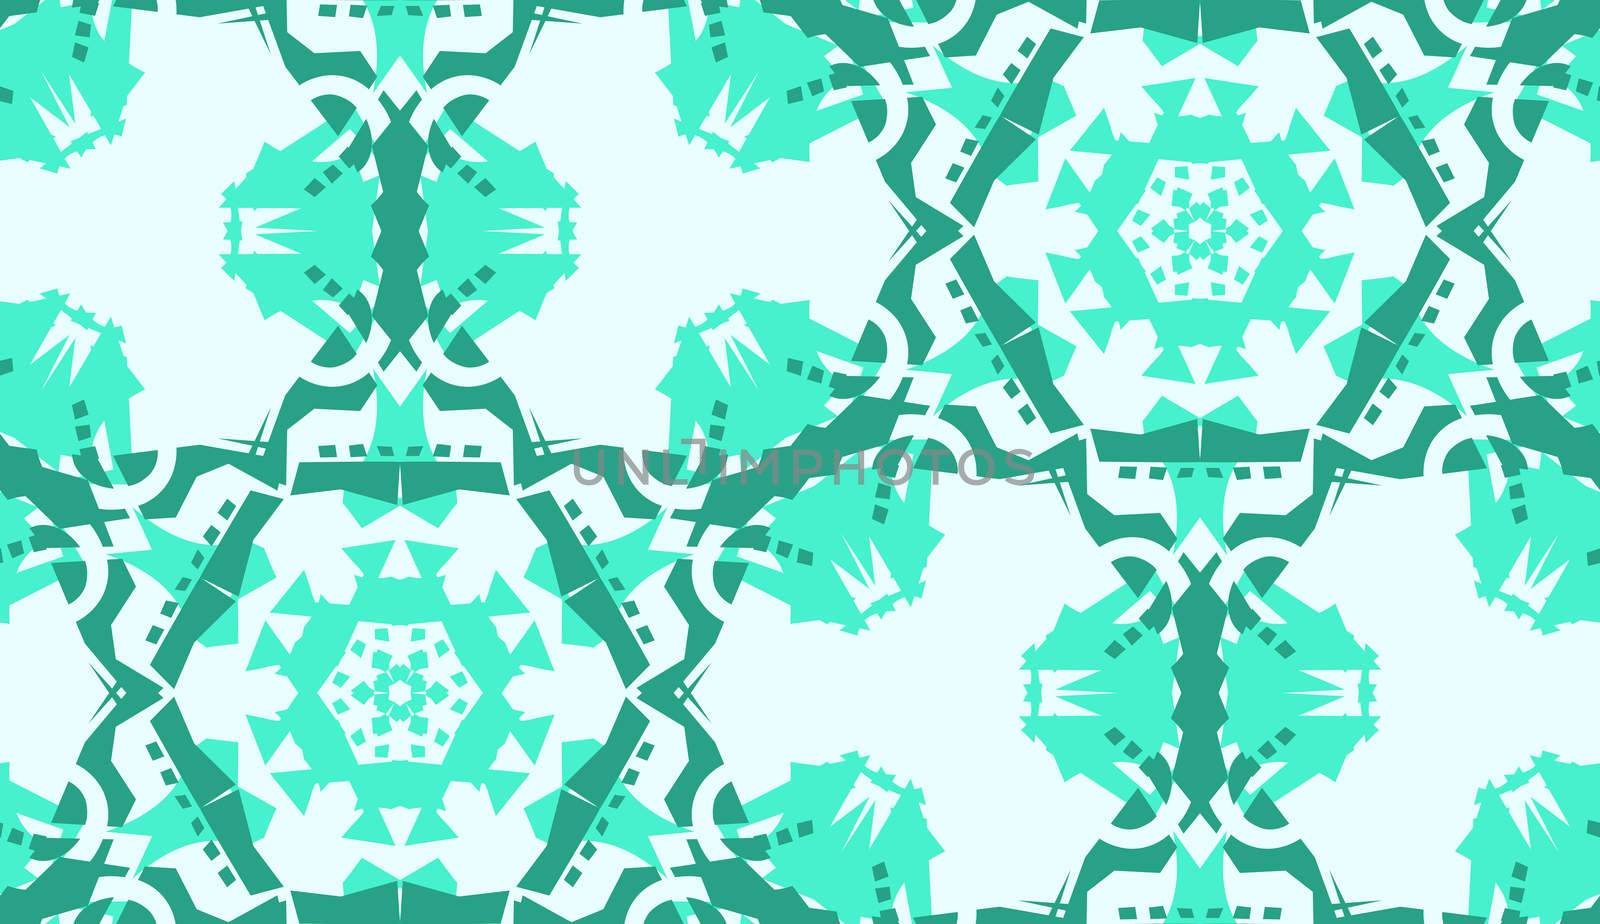 Repeating green doily pattern with hexagonal shapes